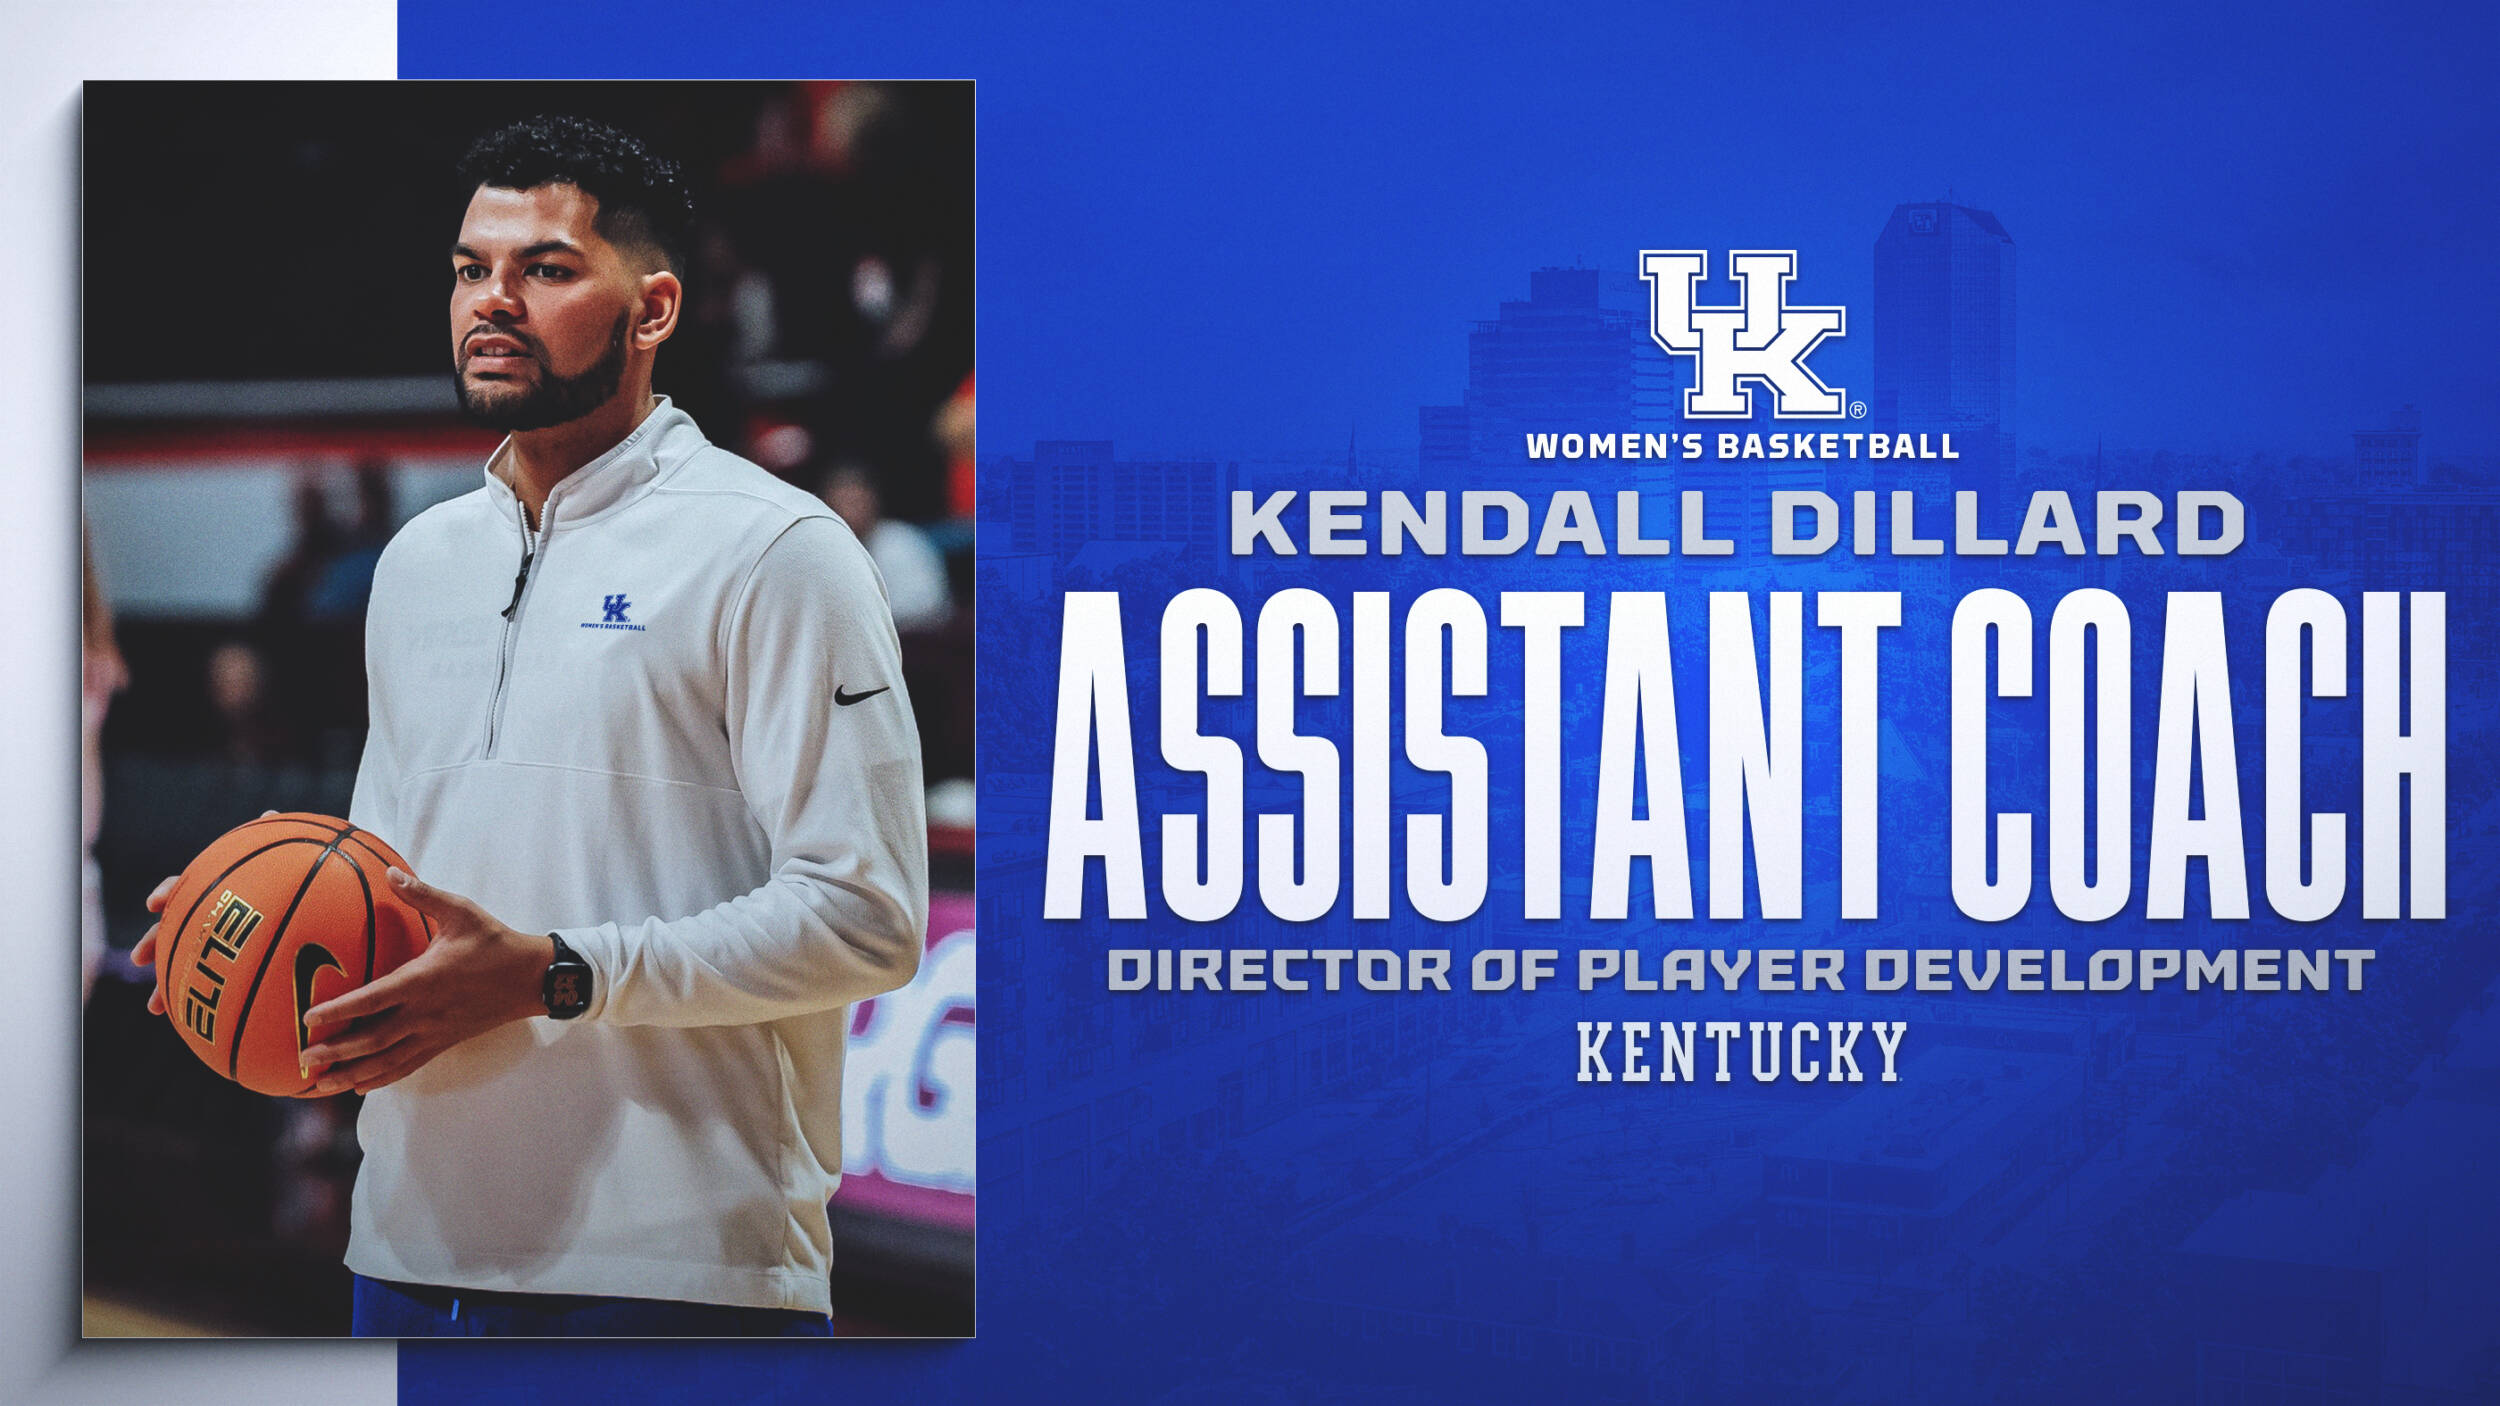 Kenny Brooks Has Hired Kendall Dillard as an Assistant Coach, Director of Player Development